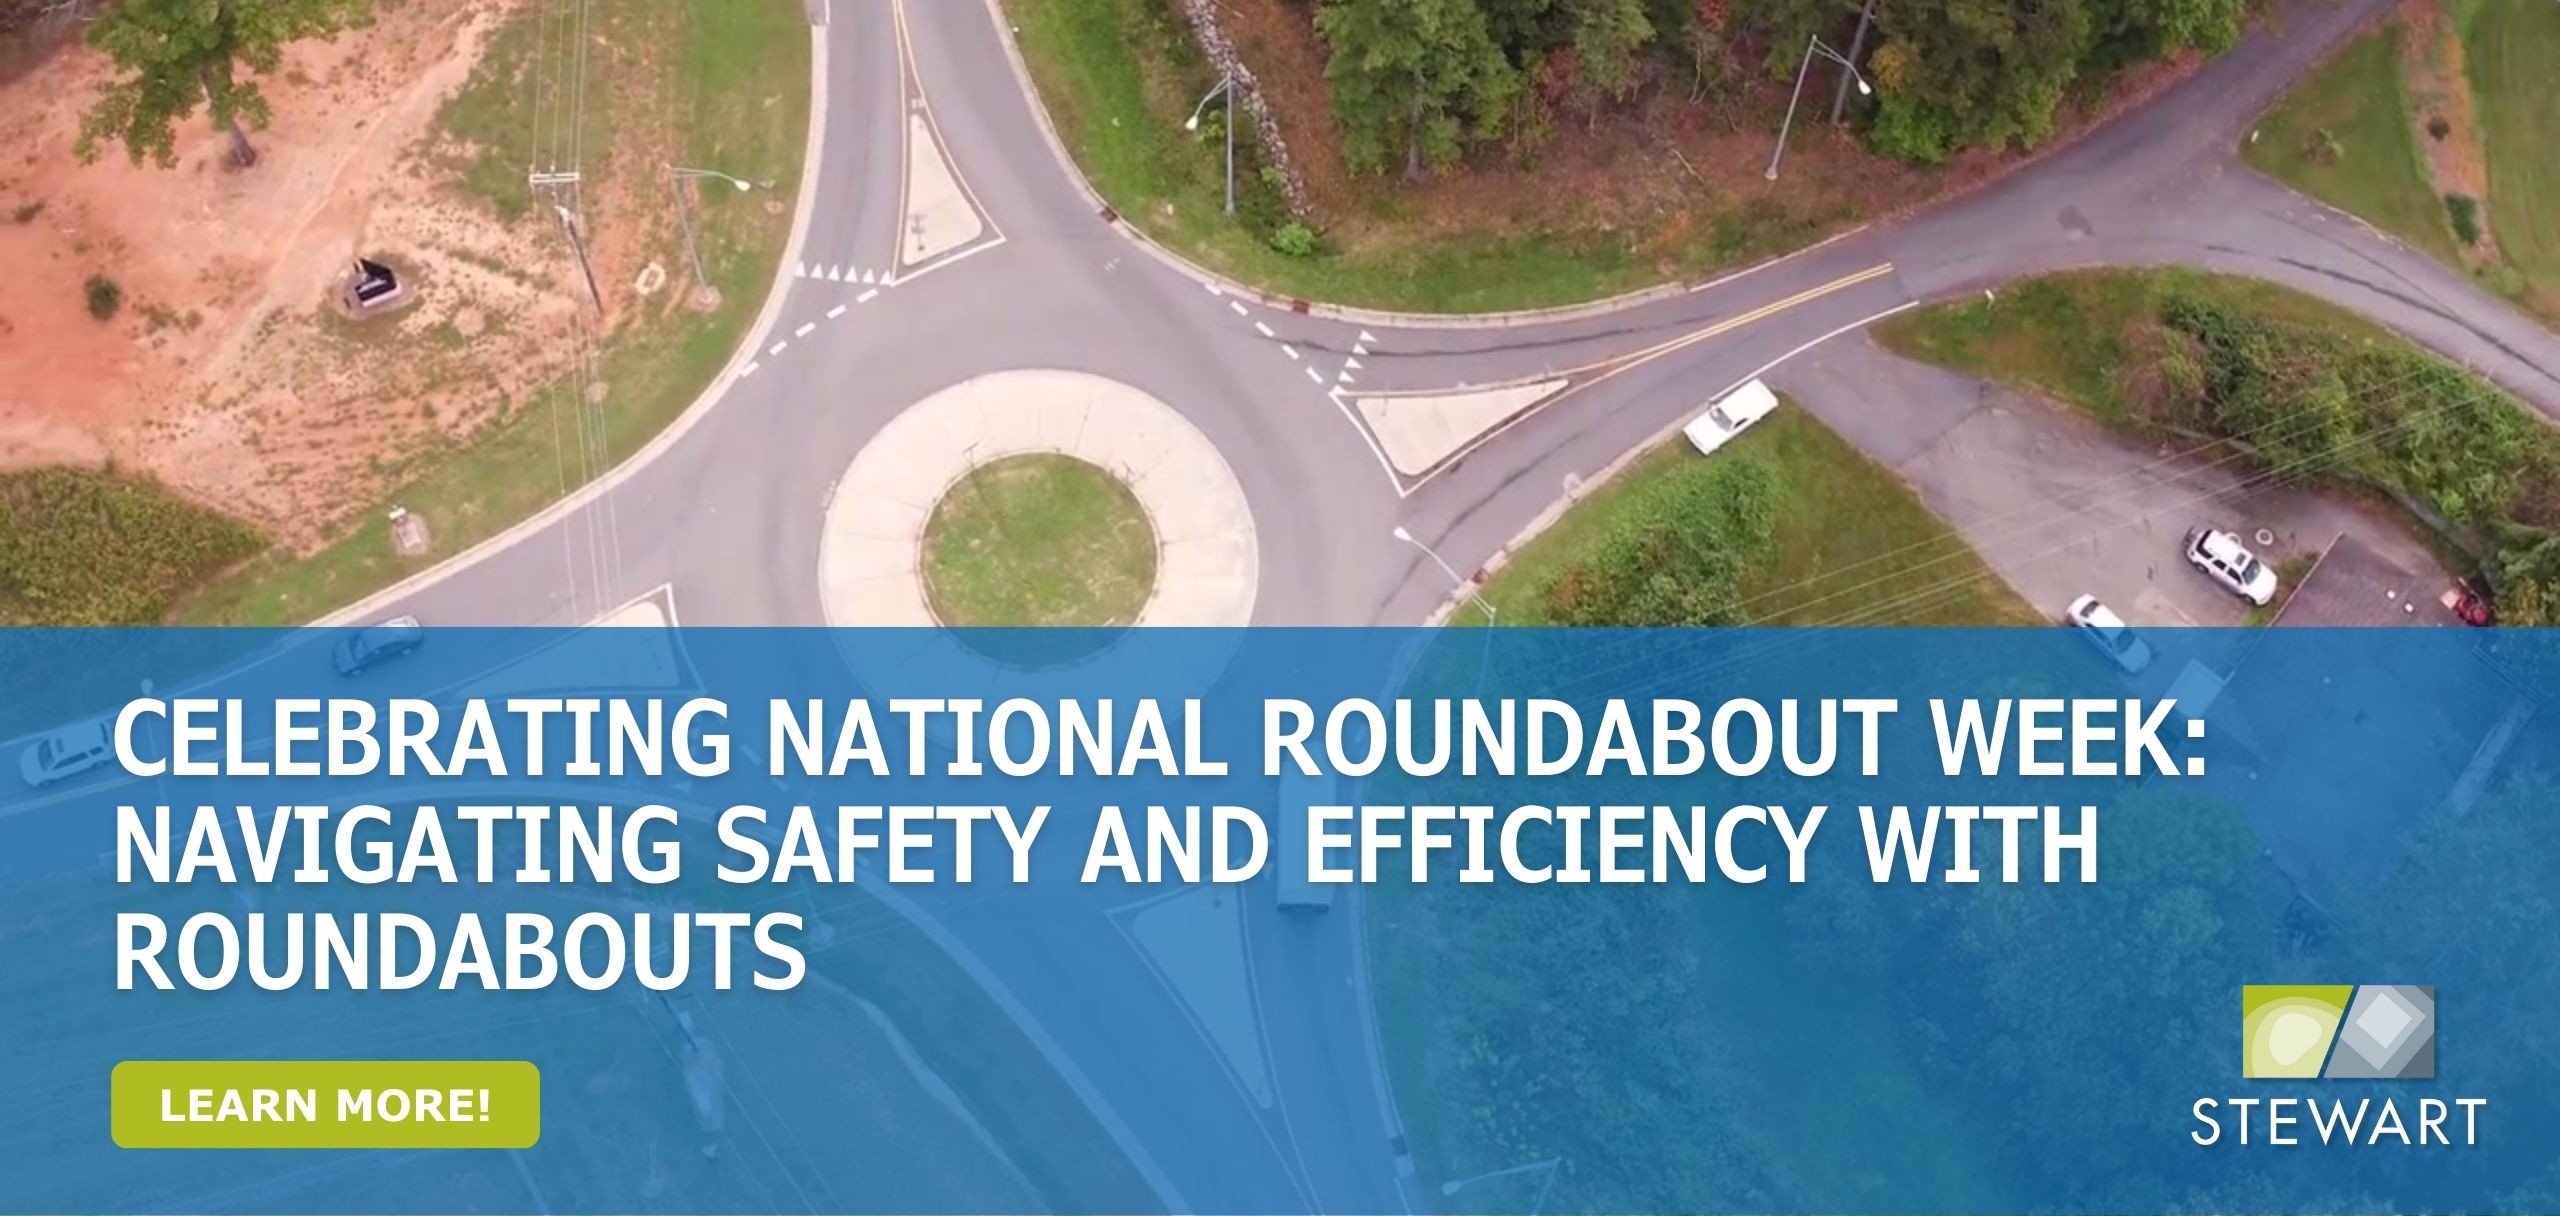 Celebrating National Roundabout Week: Navigating Safety and Efficiency with Roundabouts